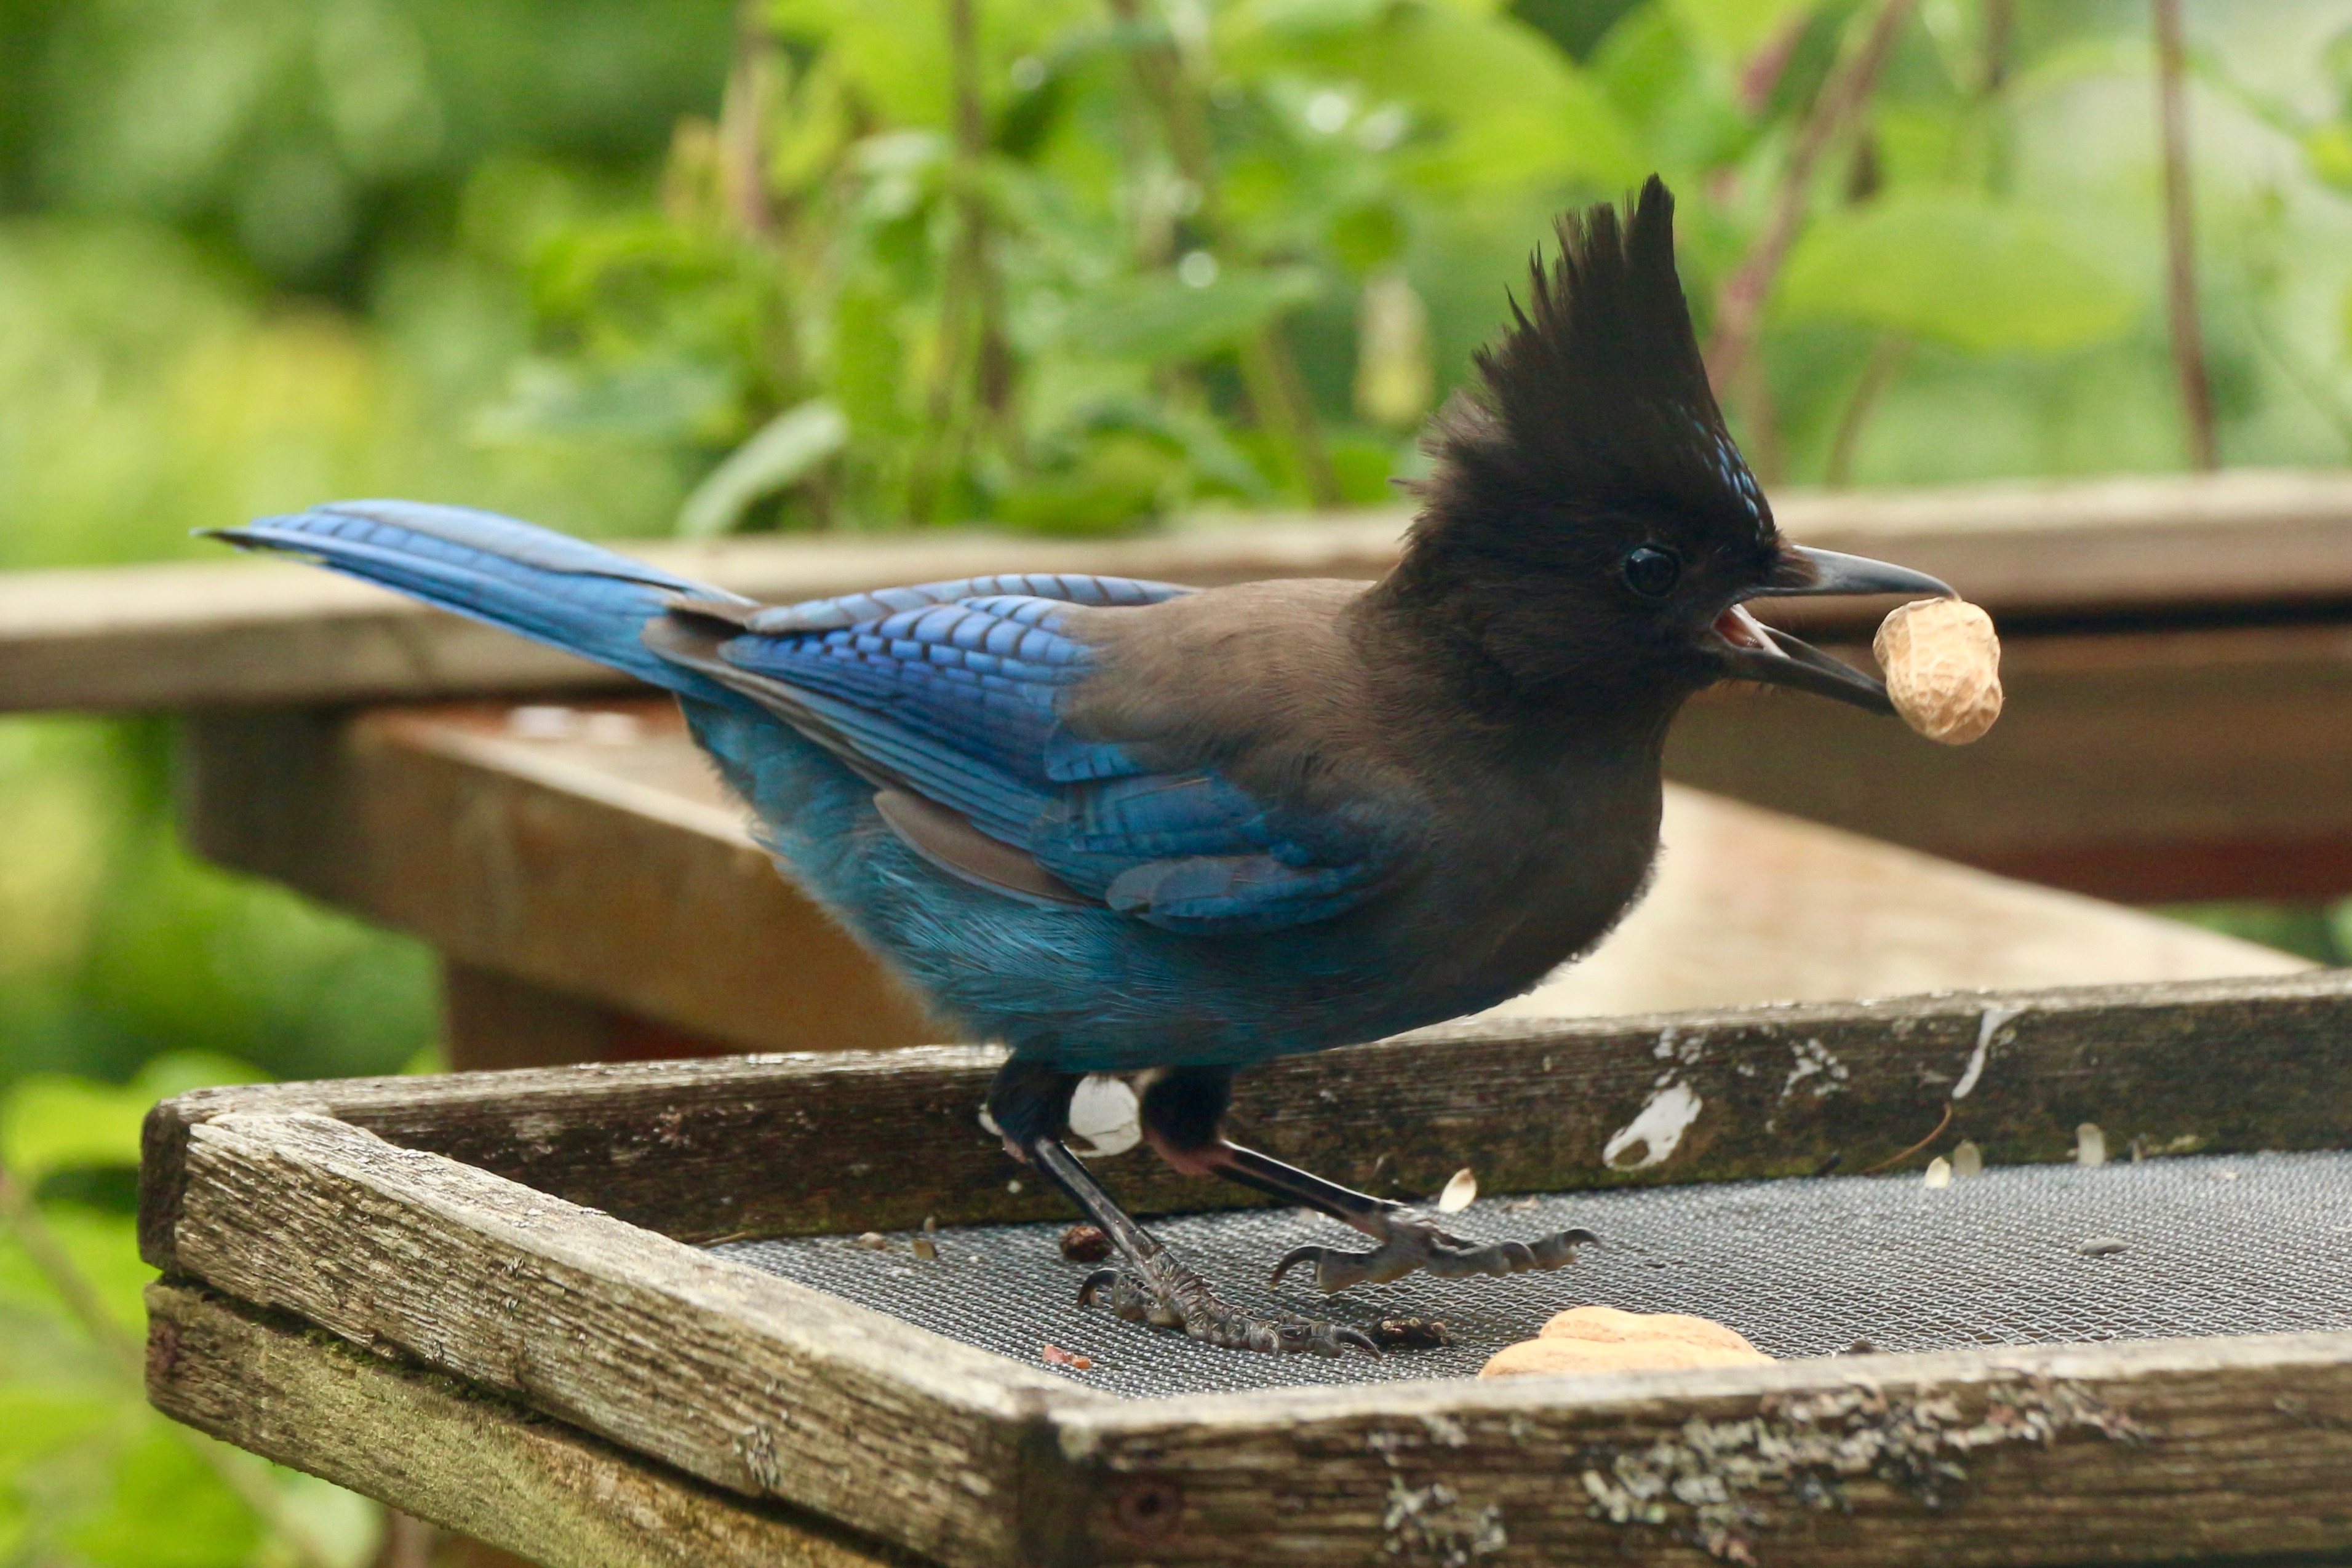 A Steller's jay cheekily grabs a peanut at a feeder full of peanuts. This jay has a lot of gorgeous blue feathers and a black head with a little crest that is raised. They used to come to this feeder and stock up on more peanuts than they could eat at a given time, and then presumably hoard them somewhere.
